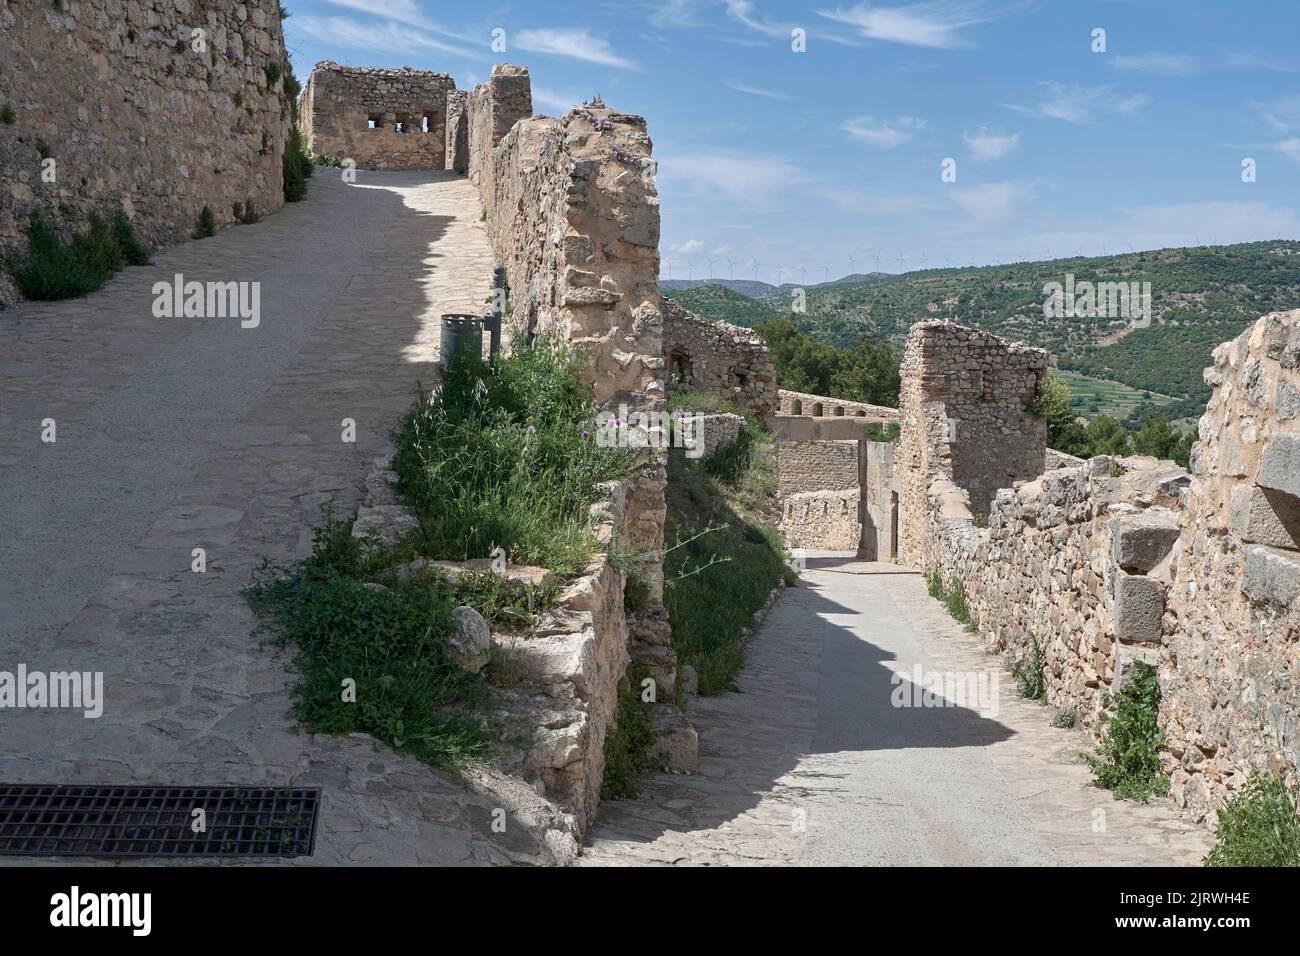 Old ruined castle in Morella, Spain Stock Photo